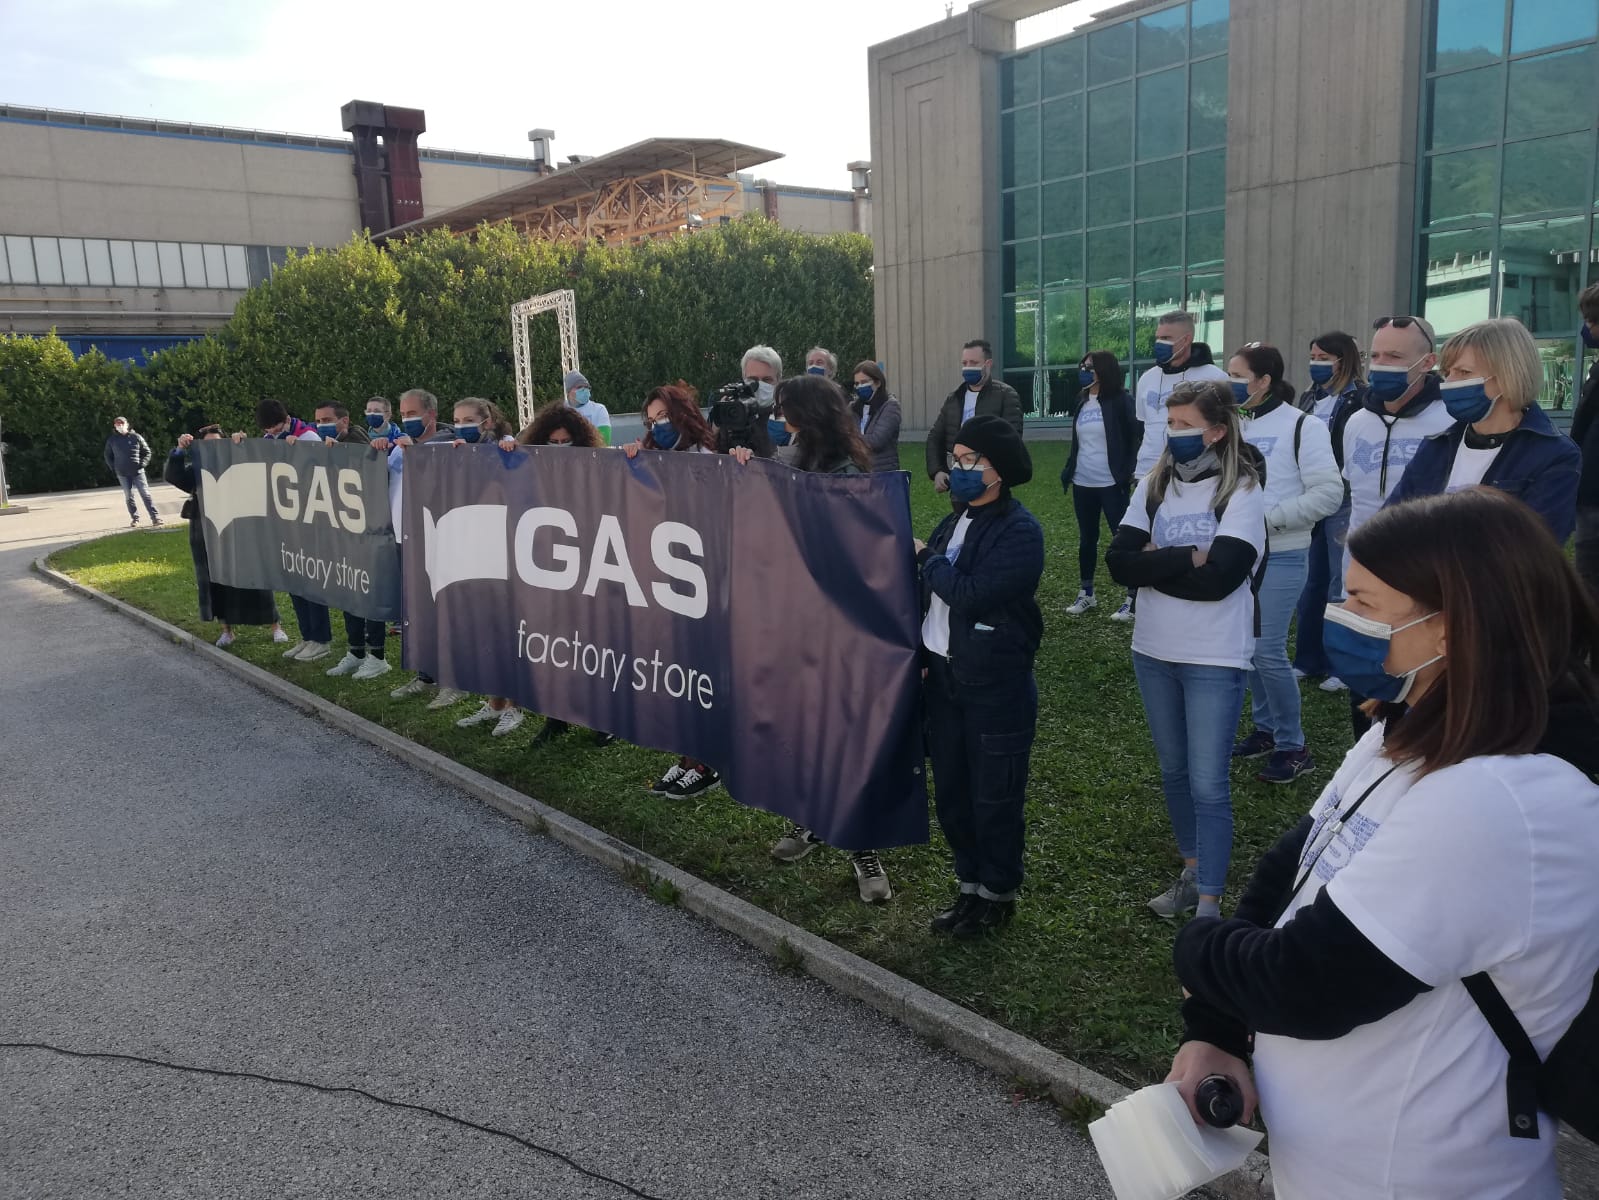 297841-gas_factory_store_sit_in_3